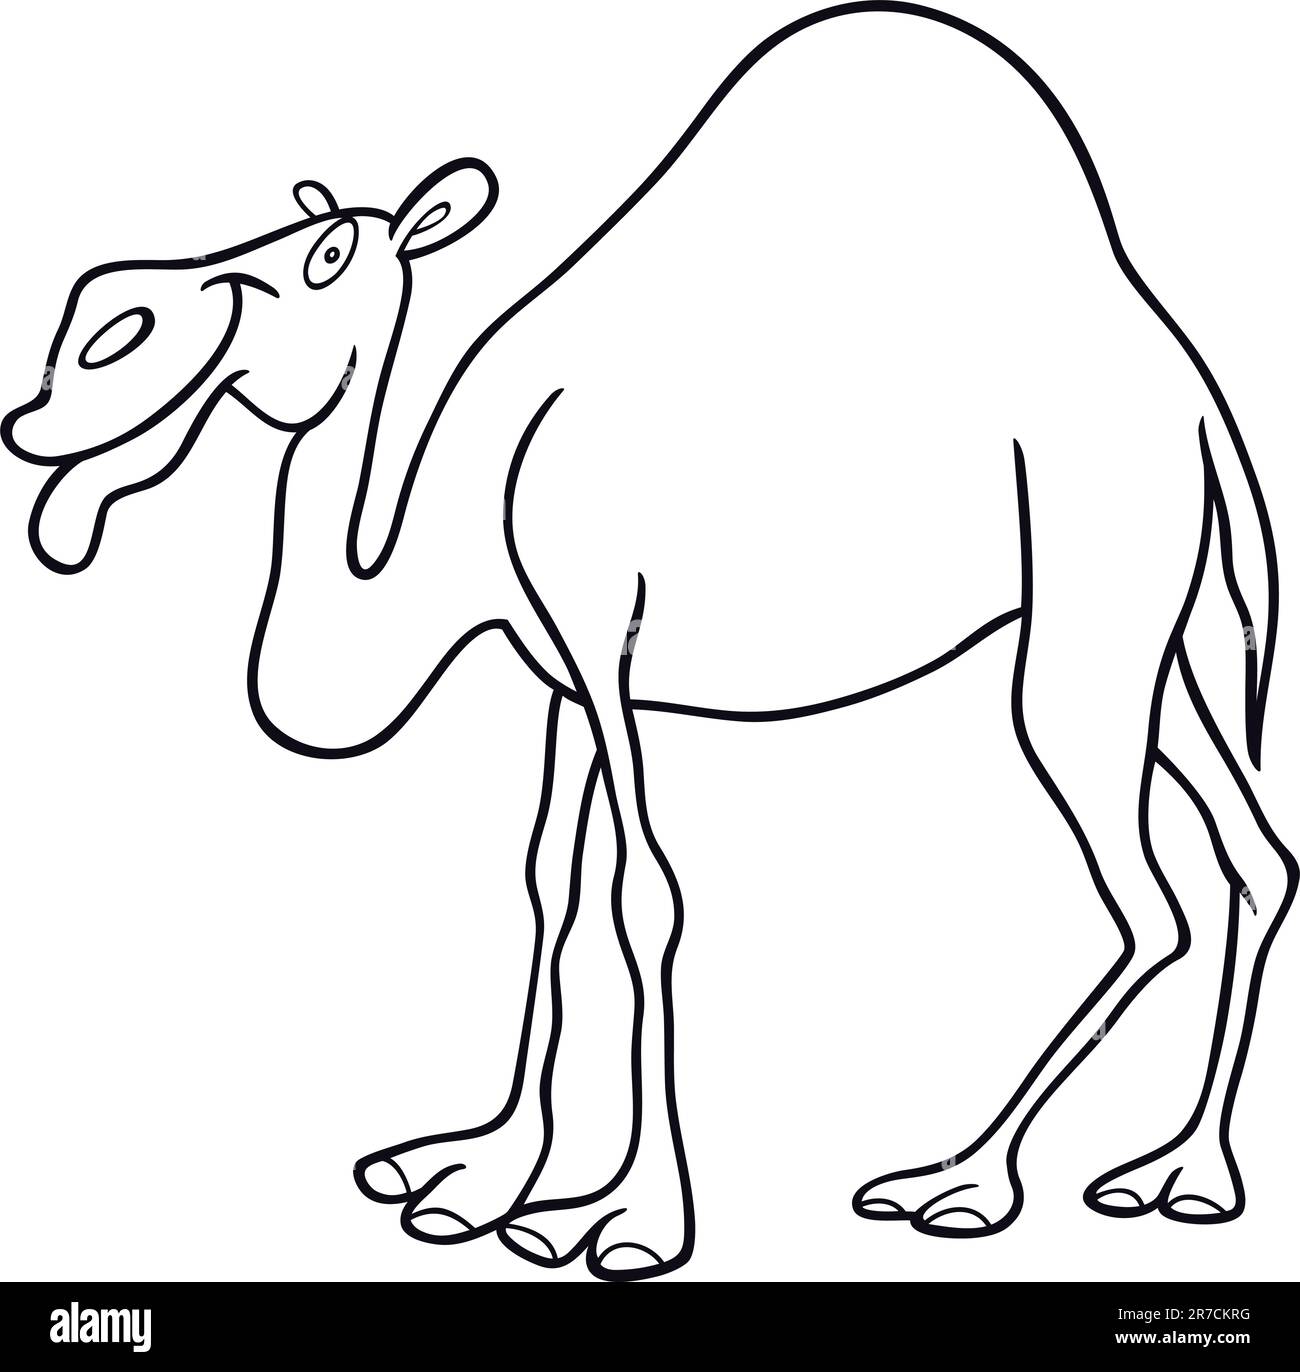 cartoon illustration of dromedary camel for coloring book Stock Vector